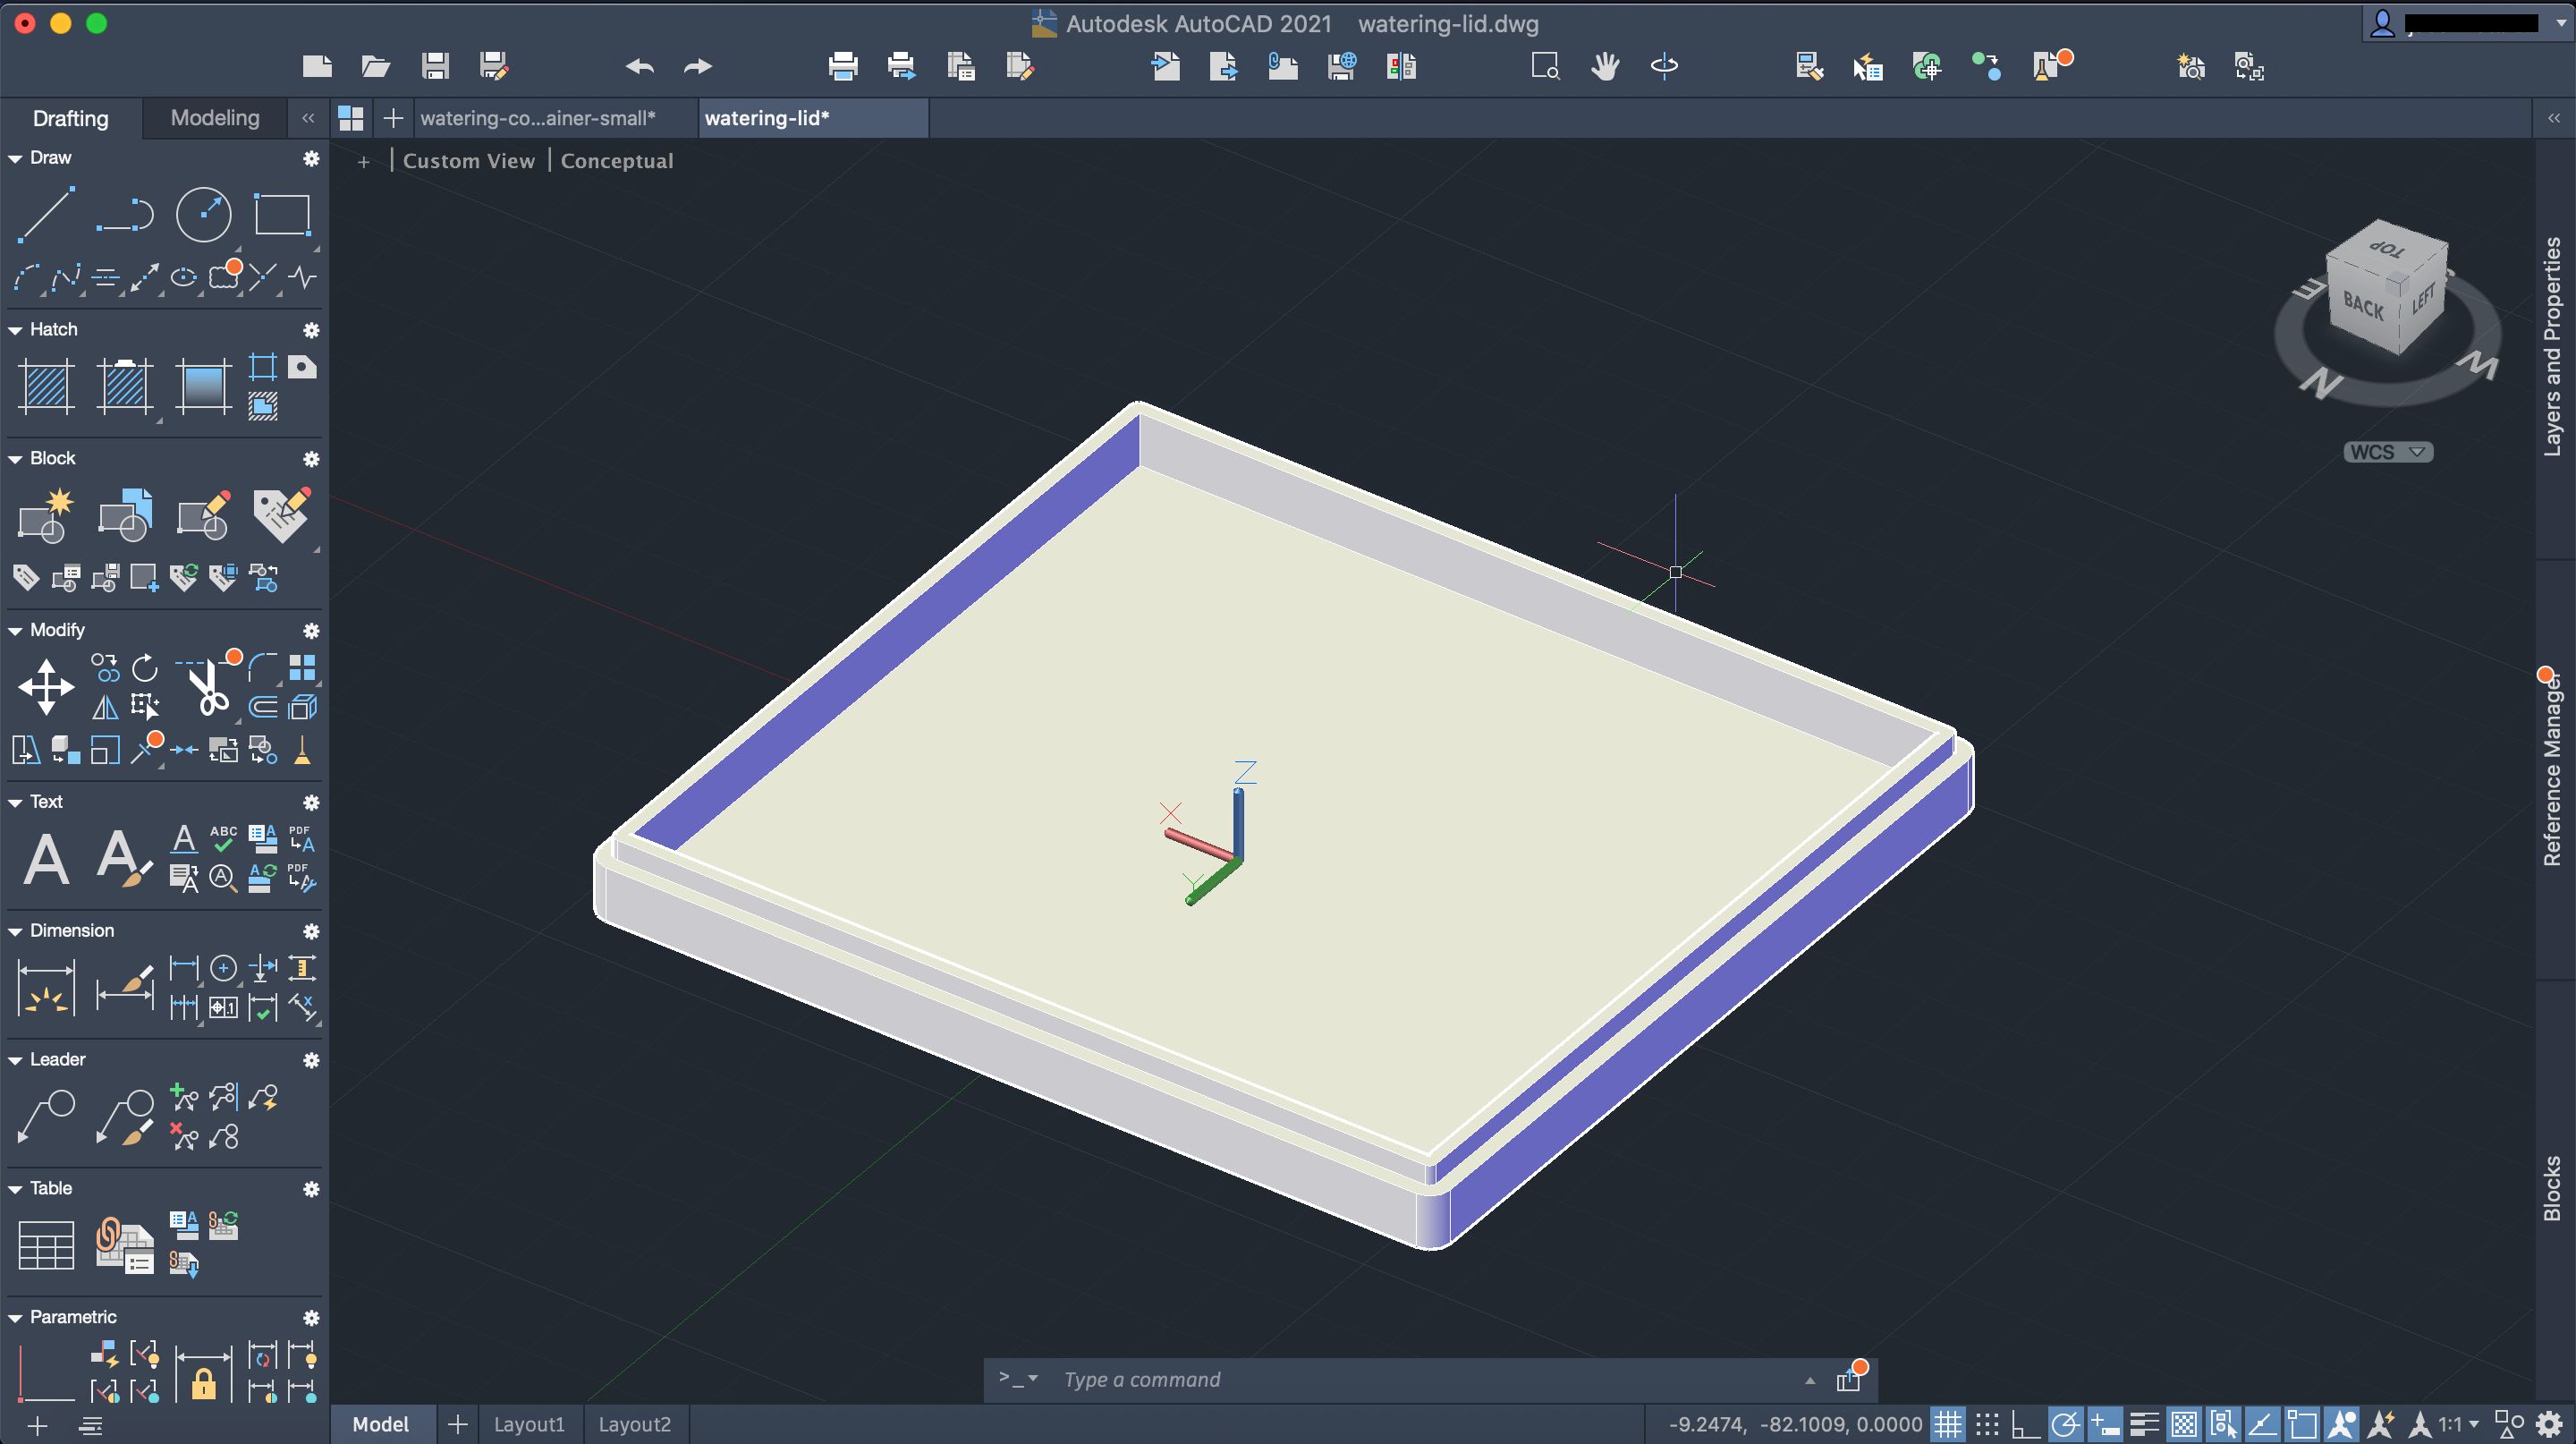 An image showcasing the lid in Autodesk AutoCAD